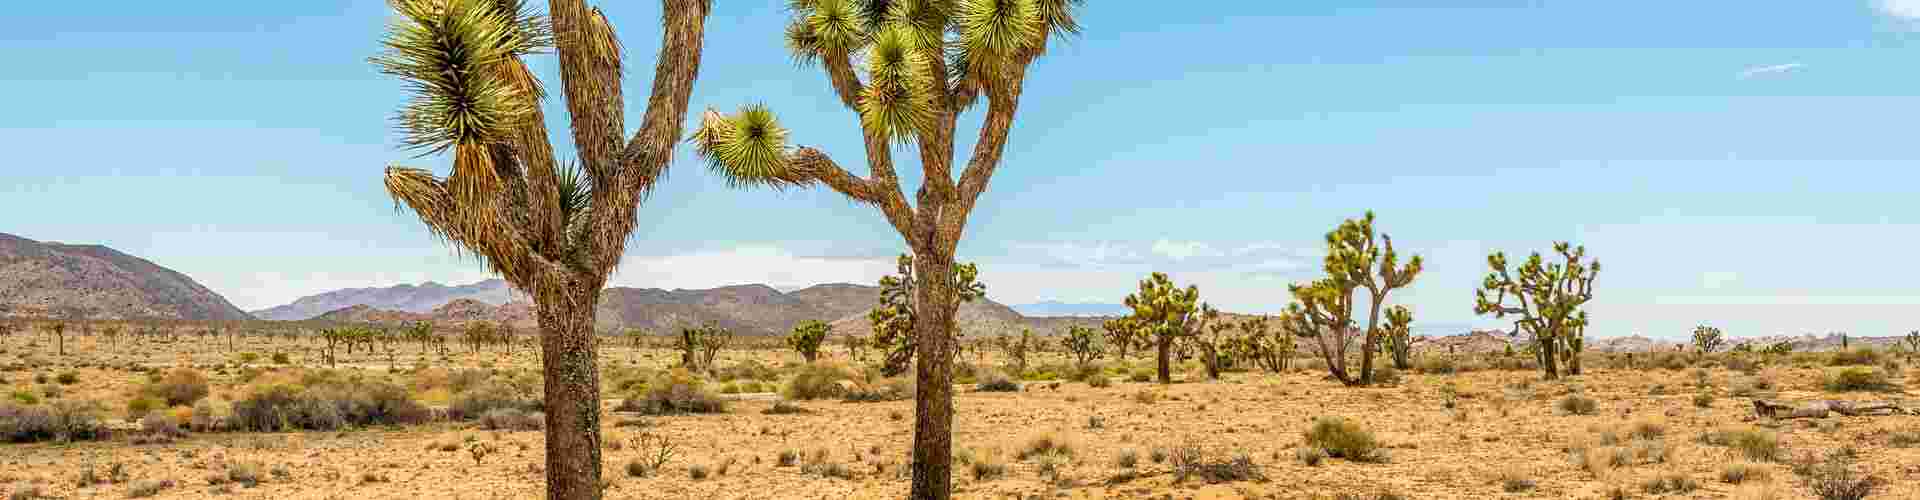 The landscapes of Joshua Tree National Park